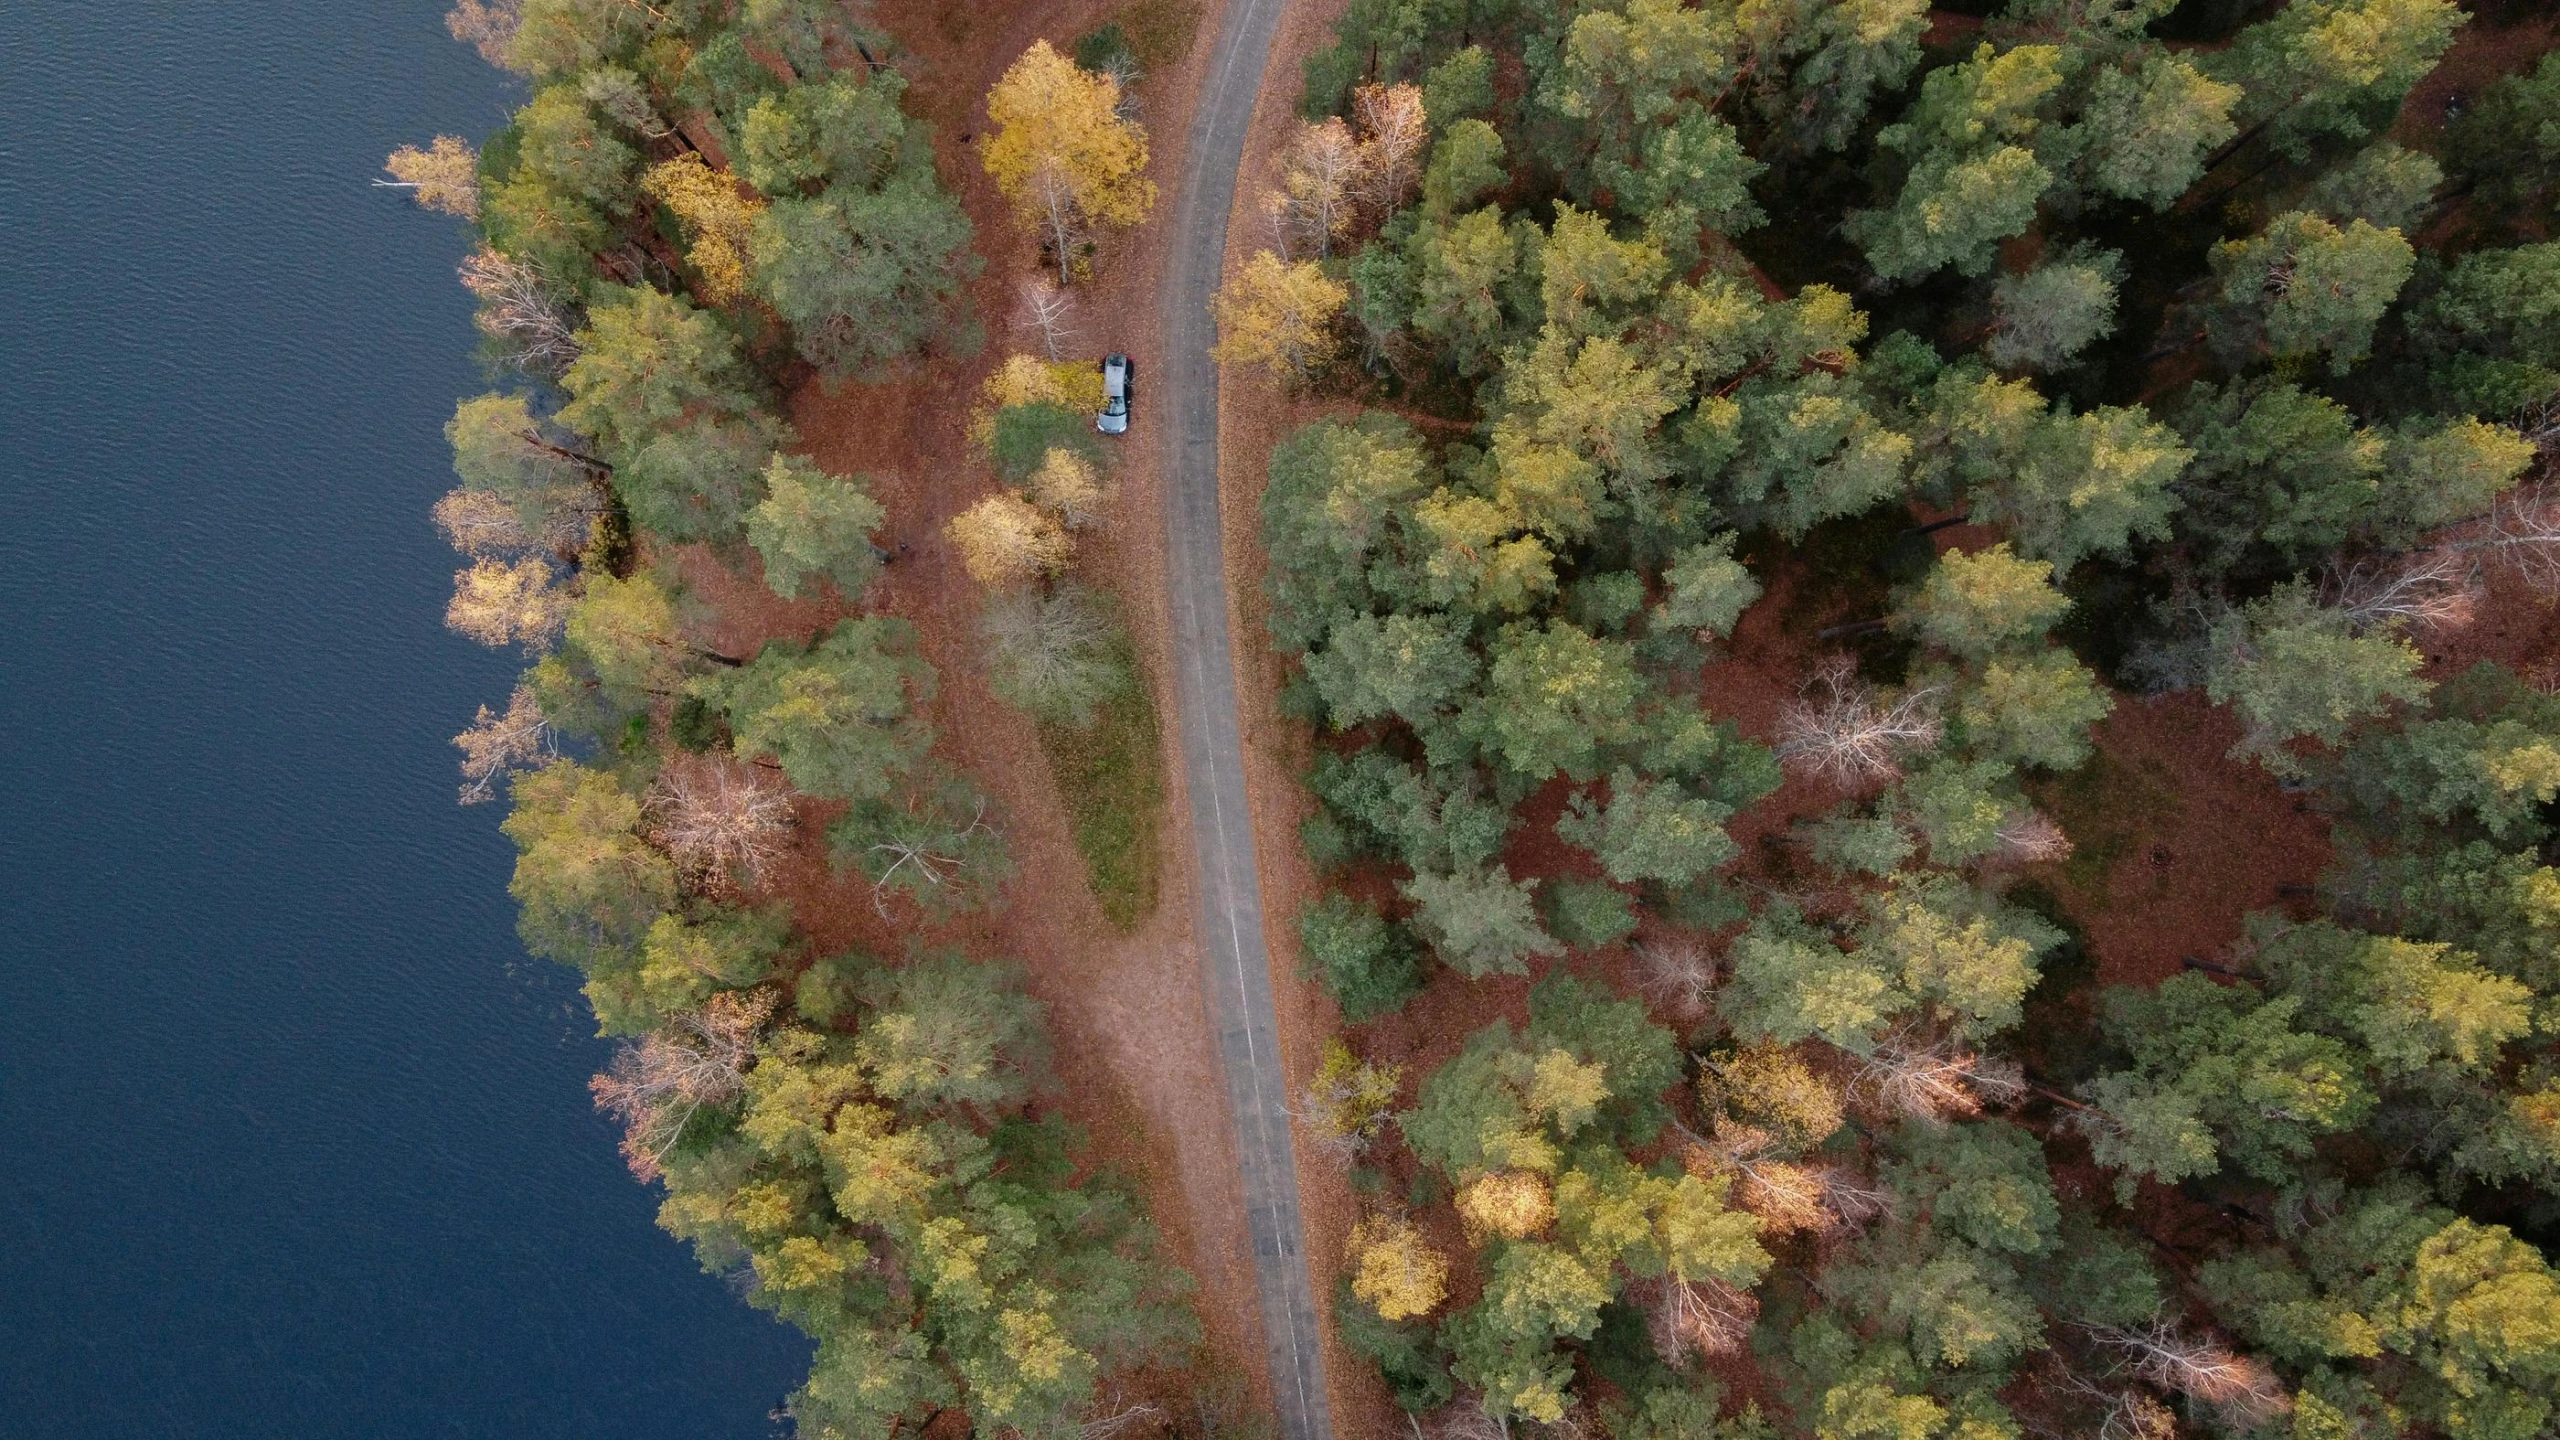 an aerial view of a road and a body of water